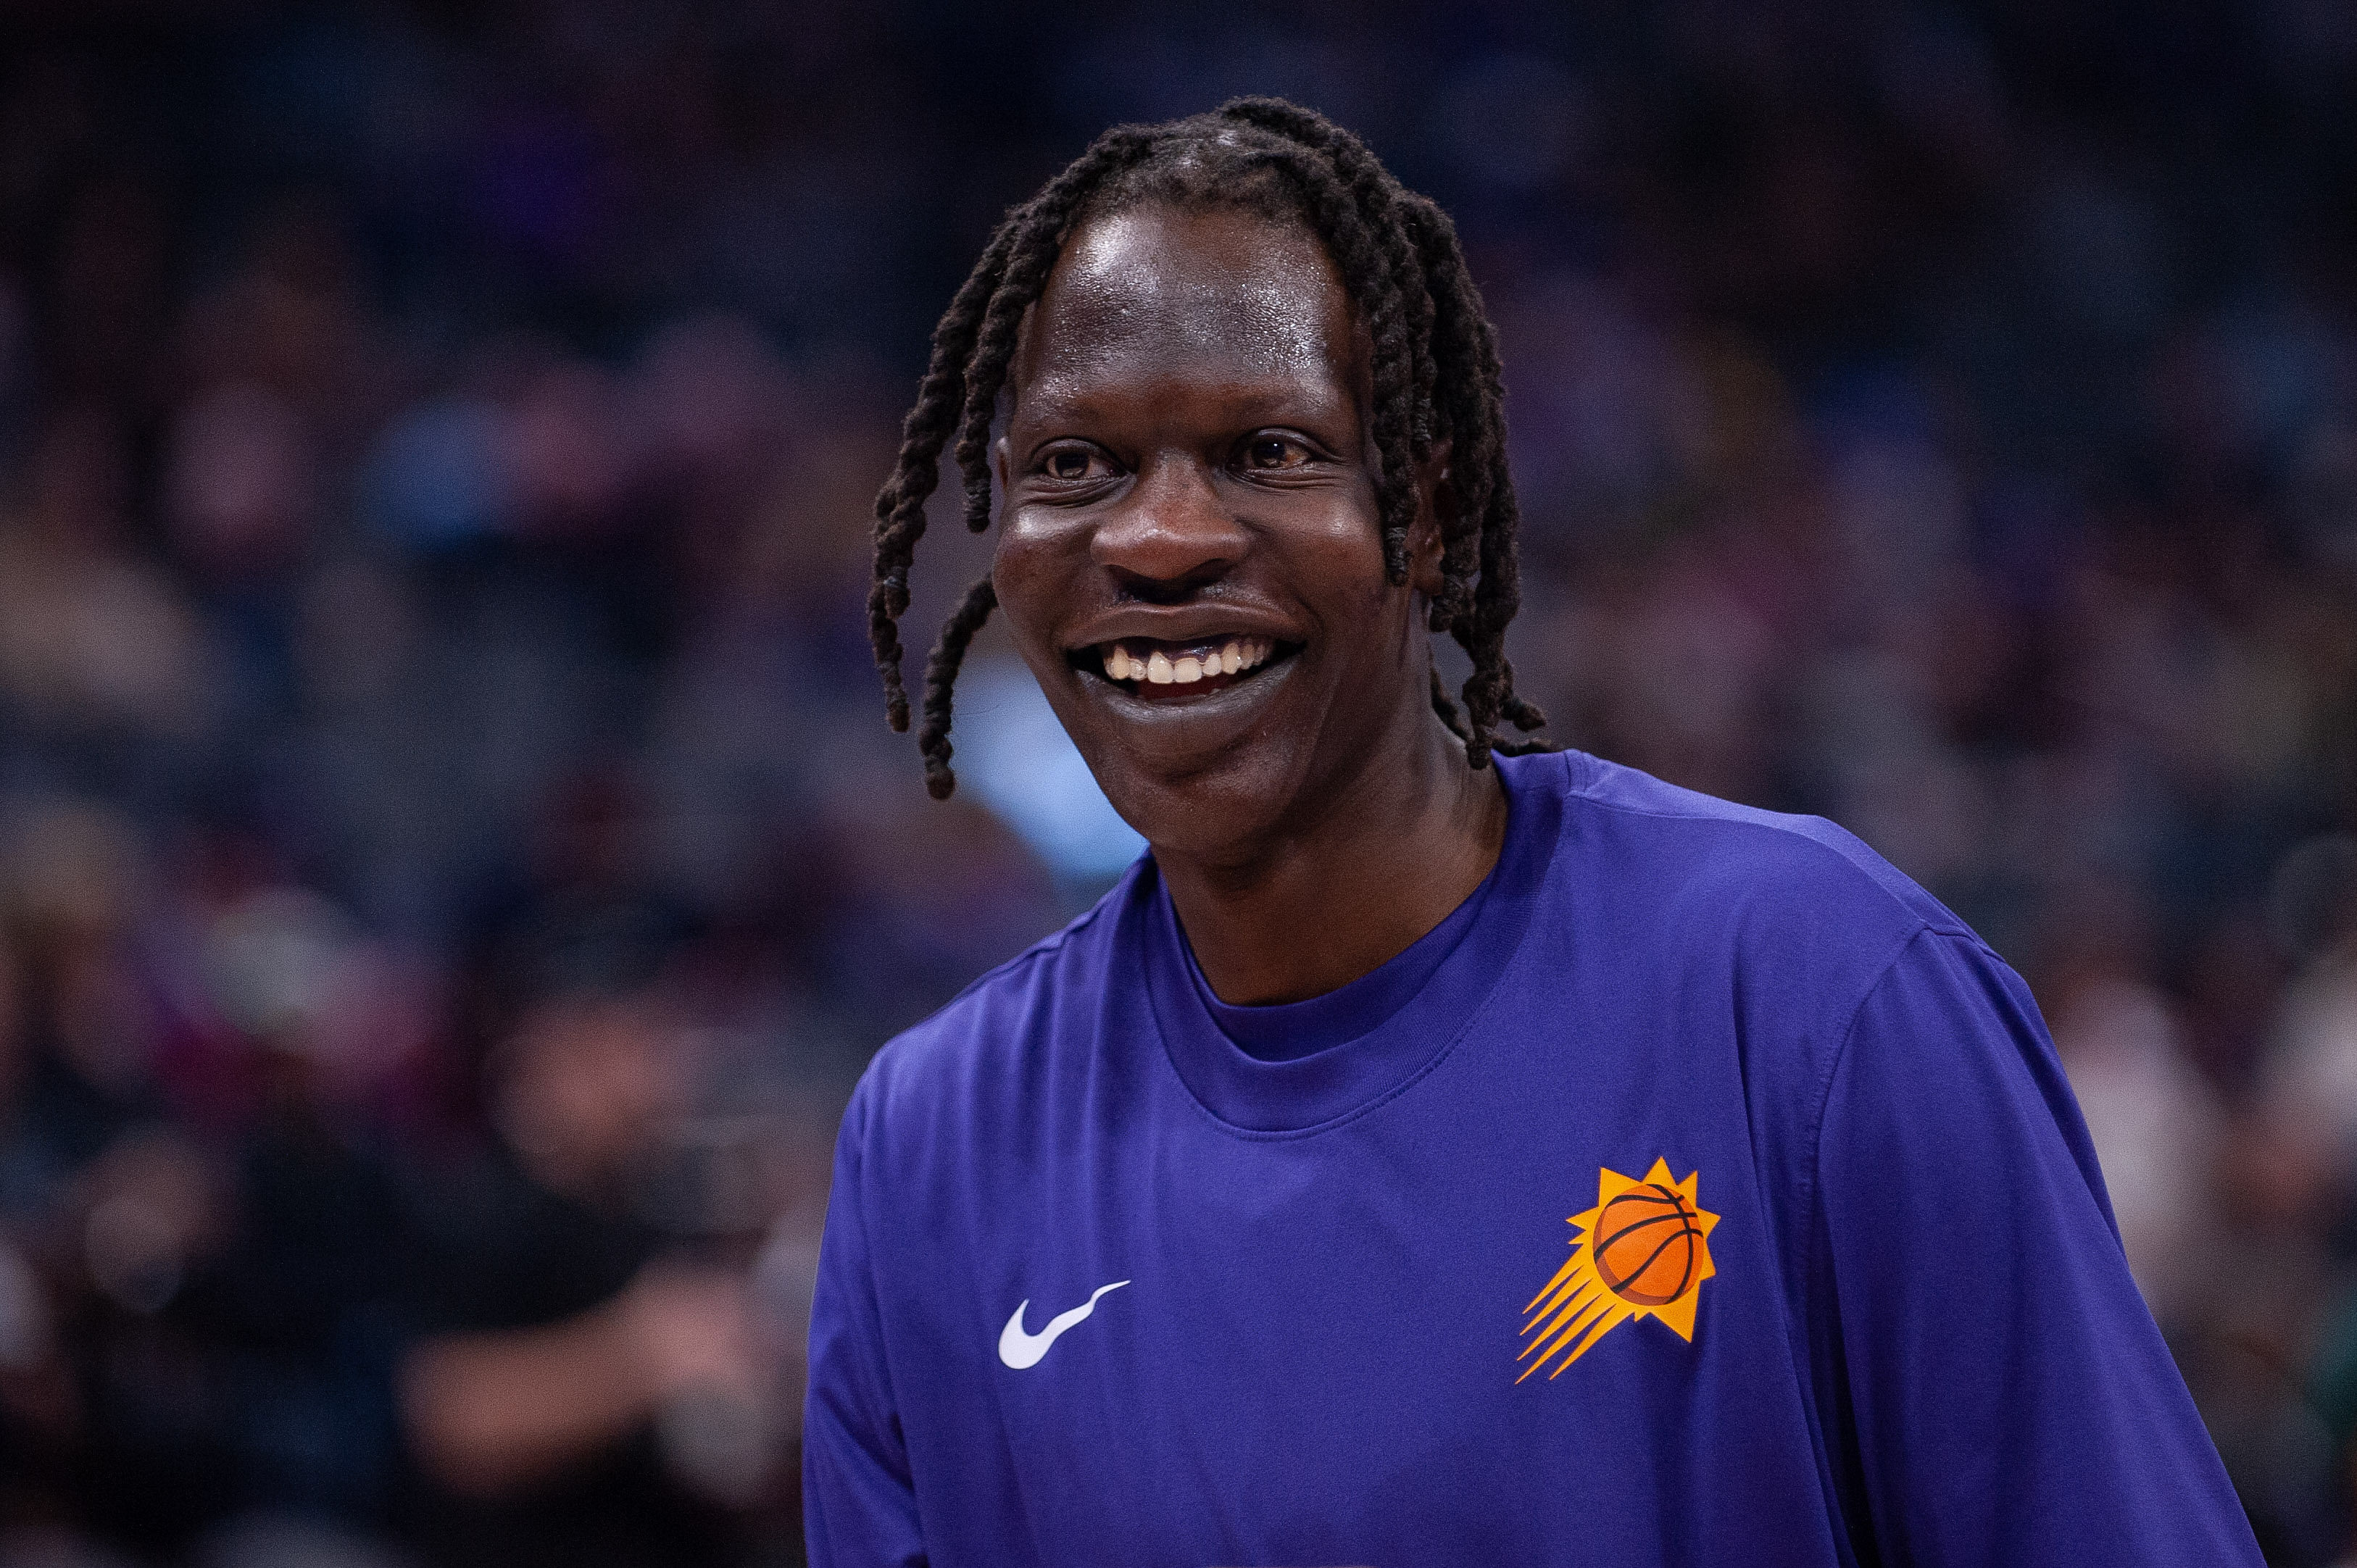 Will Bol Bol find a new home in Boston? (Imagn)